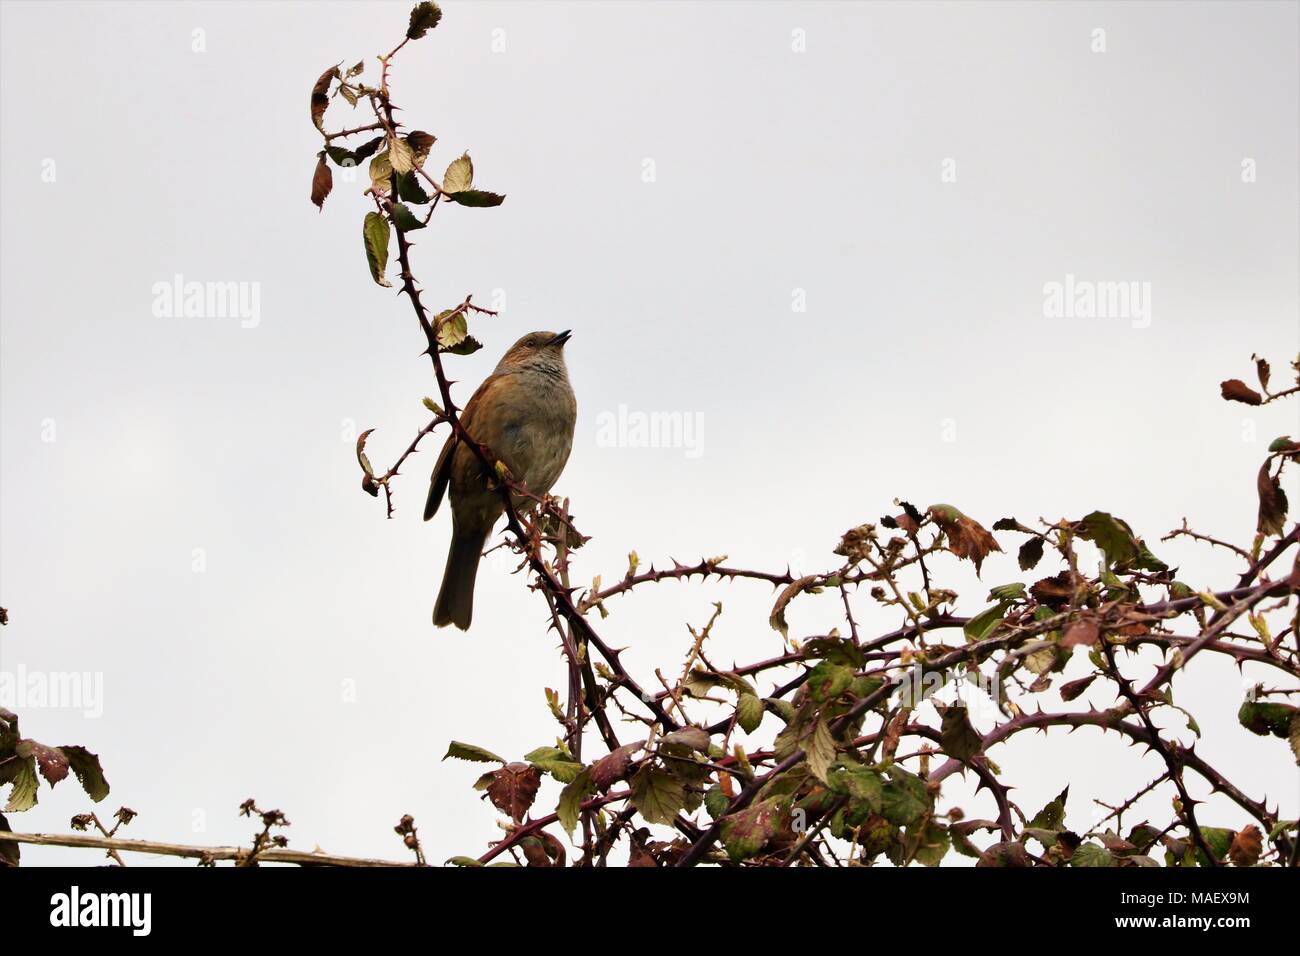 Dunnock / Hedge Sparrow perched on a branch against a cloudy white sky Stock Photo